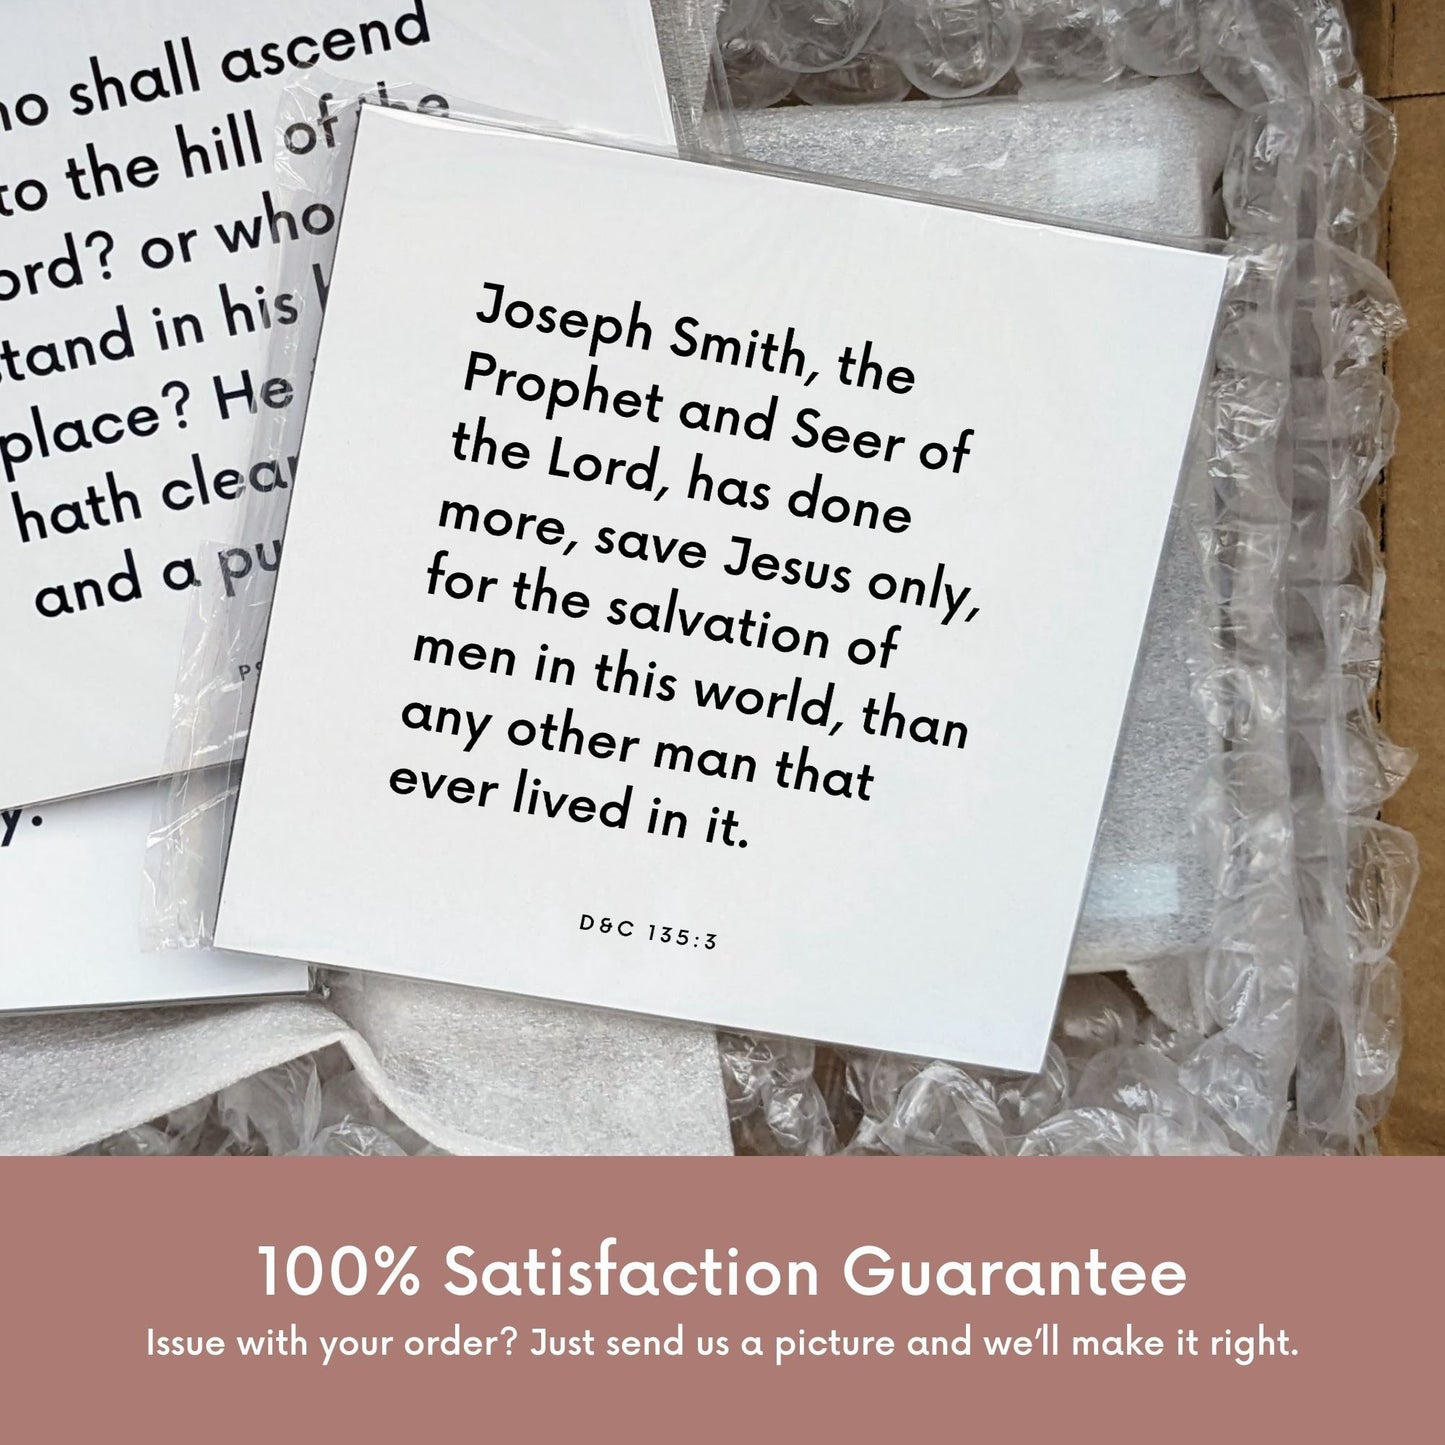 Shipping materials for scripture tile of D&C 135:3 - "Joseph Smith, the Prophet and Seer of the Lord"